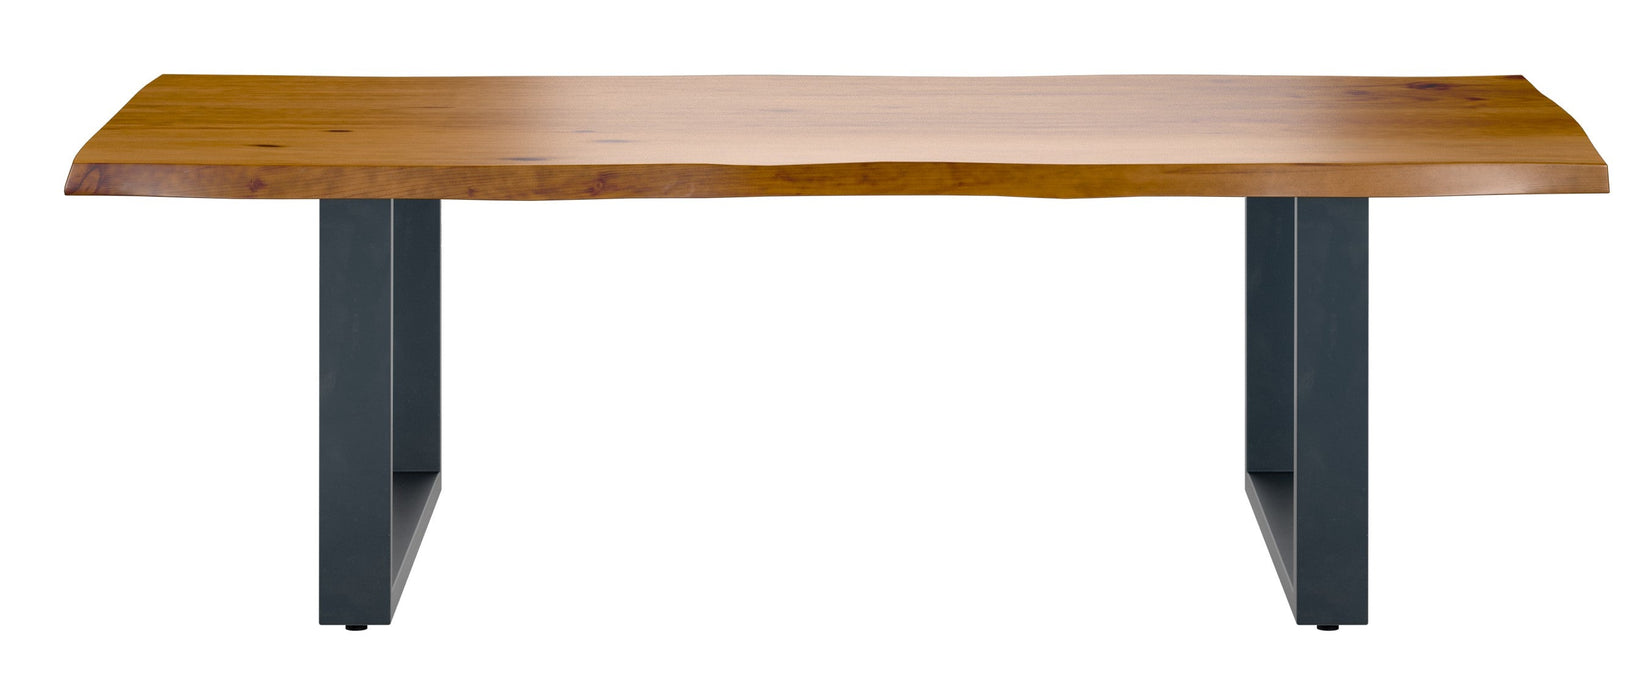 Live Edge Coffee Table - Russet Finish